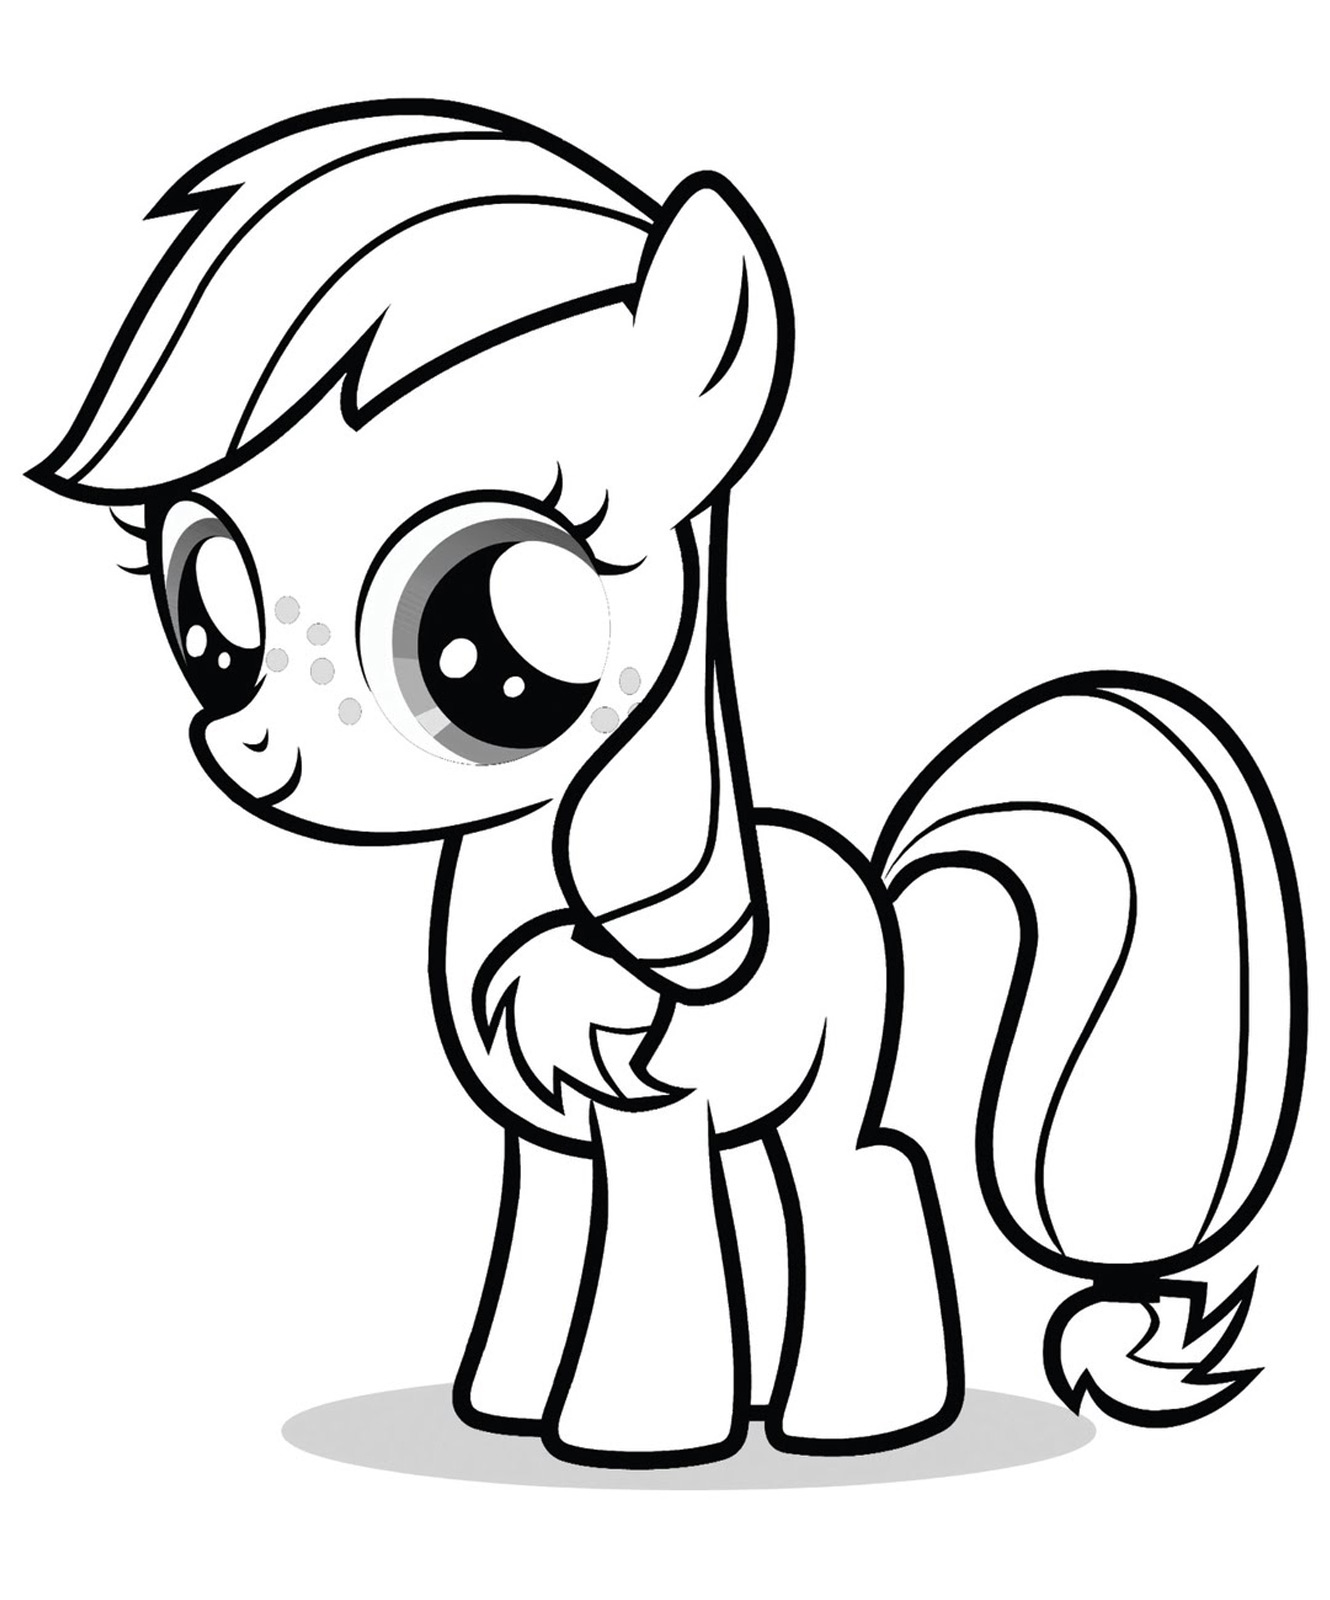 Adorable & Free My Little Pony Printable Coloring Pages